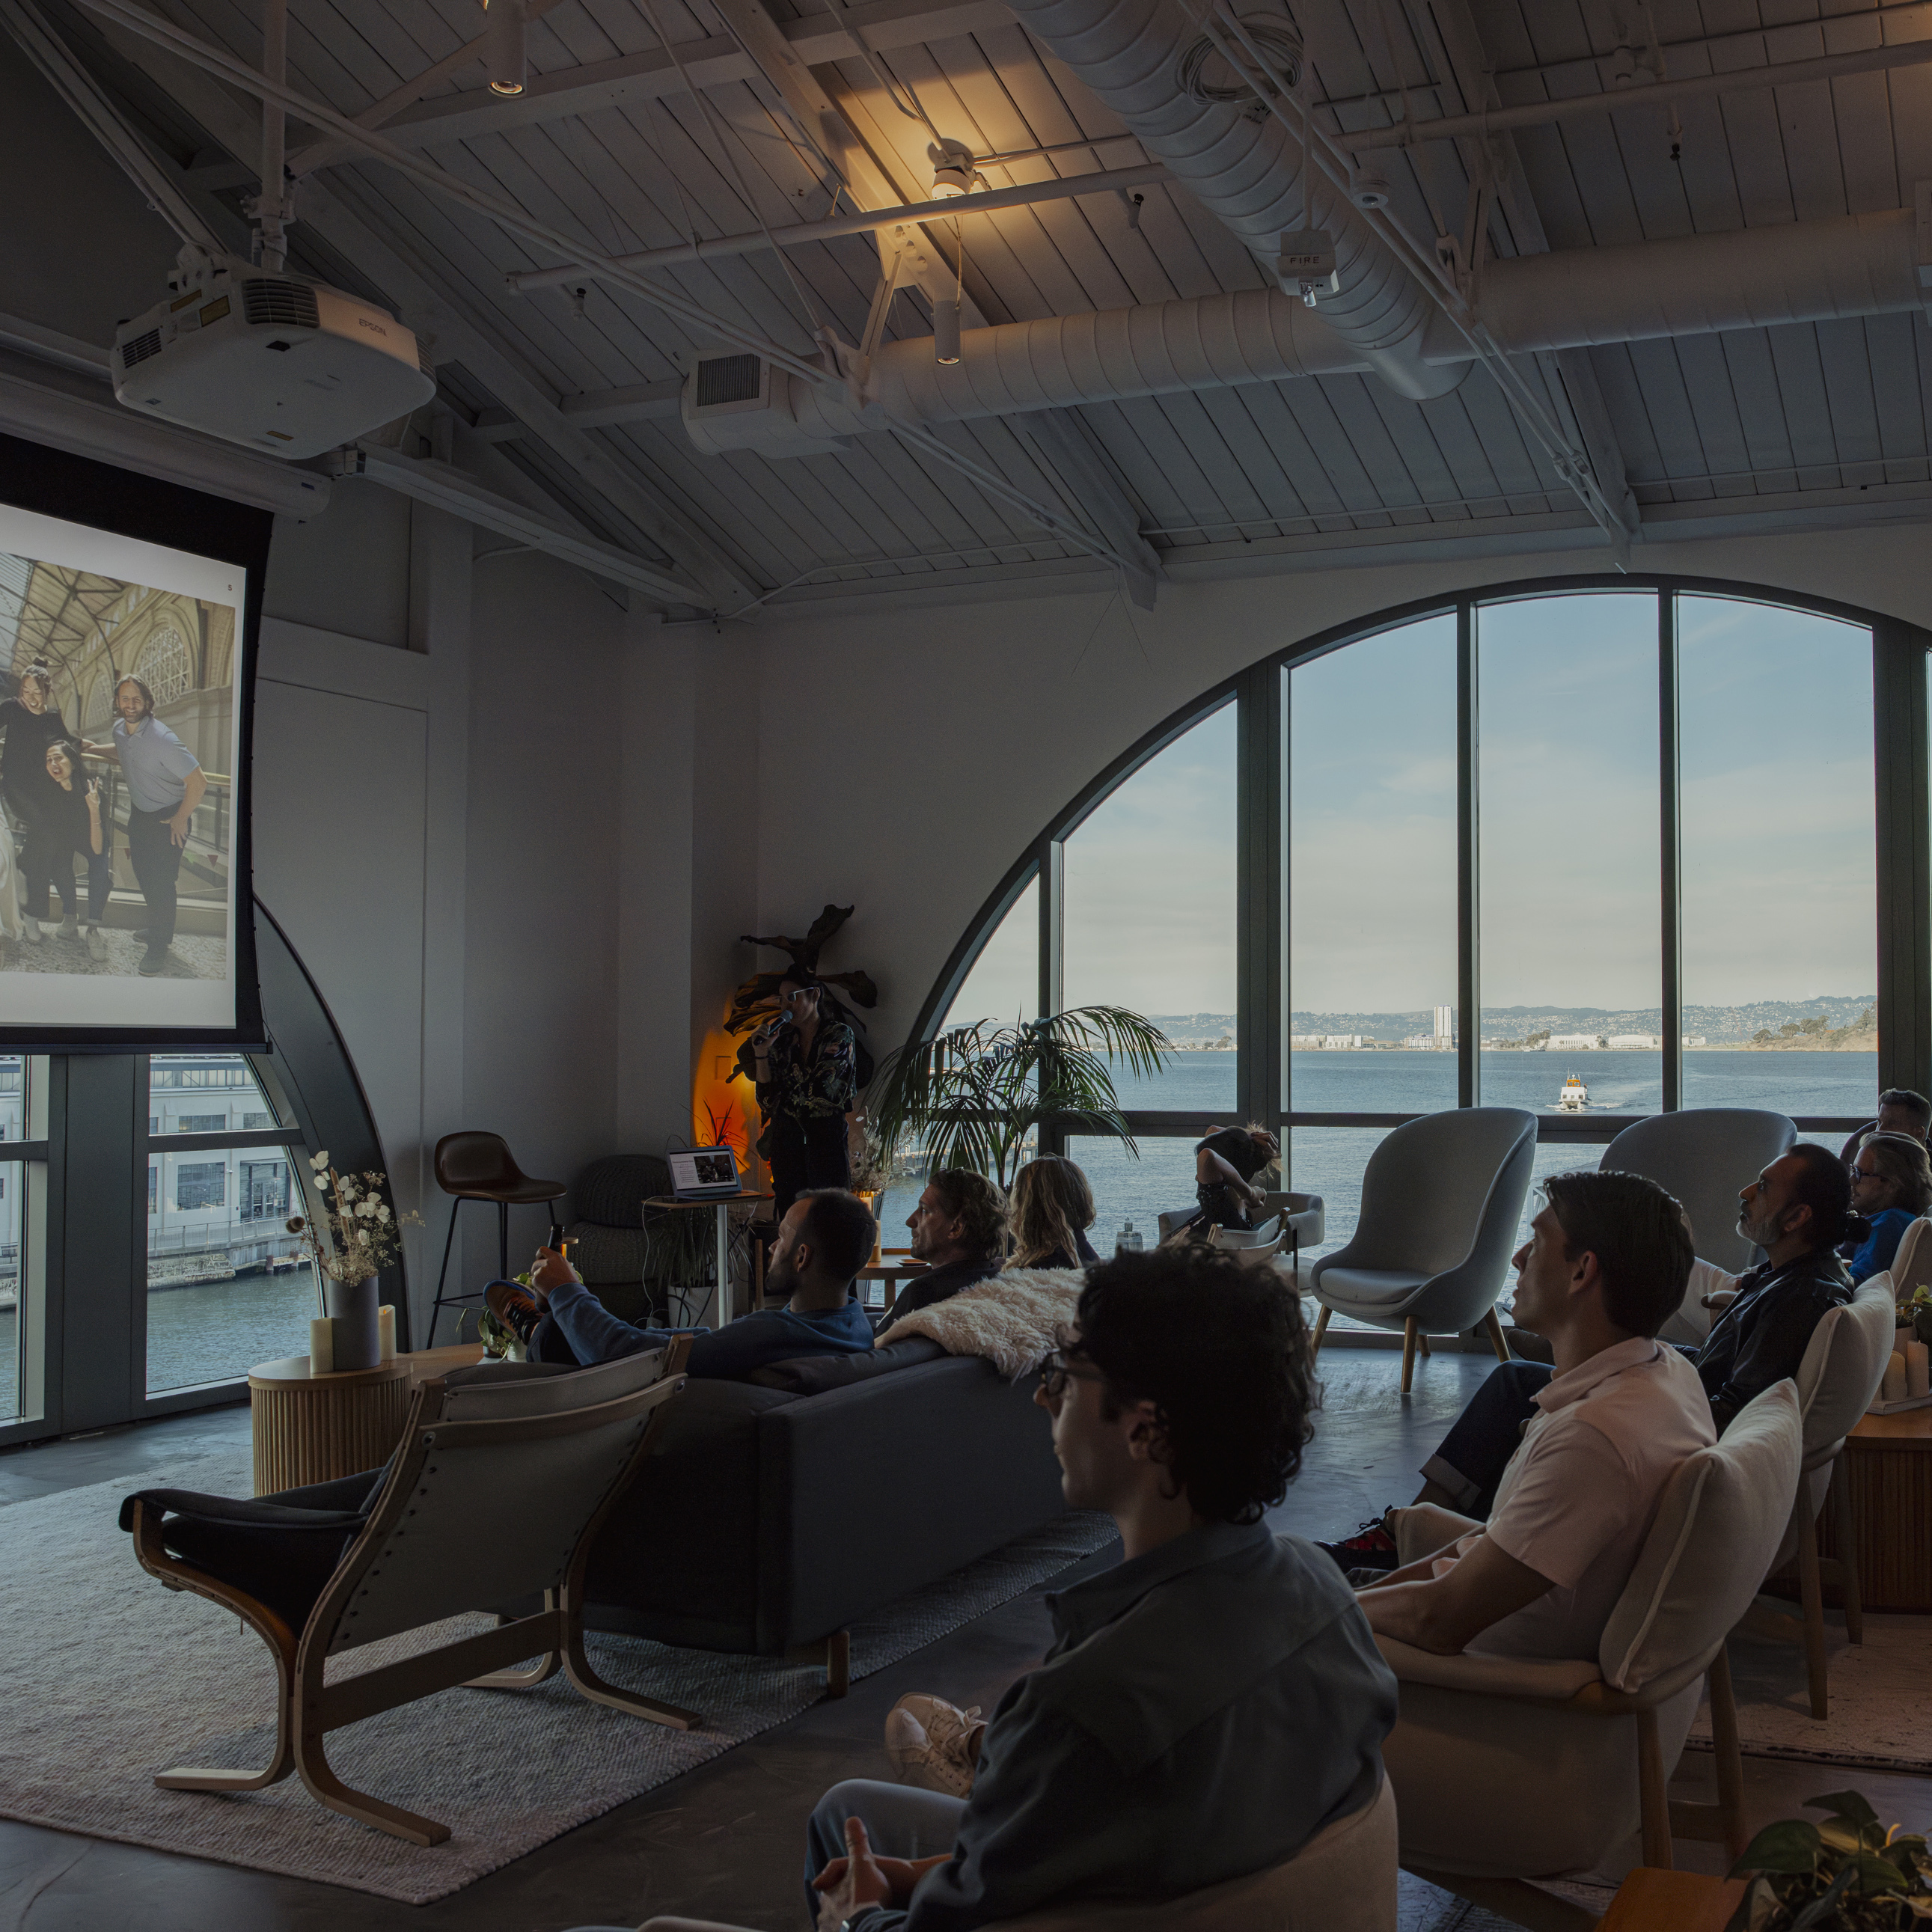 A group of people are seated in a modern room with large arched windows overlooking a body of water. They are watching a projected image on a screen.